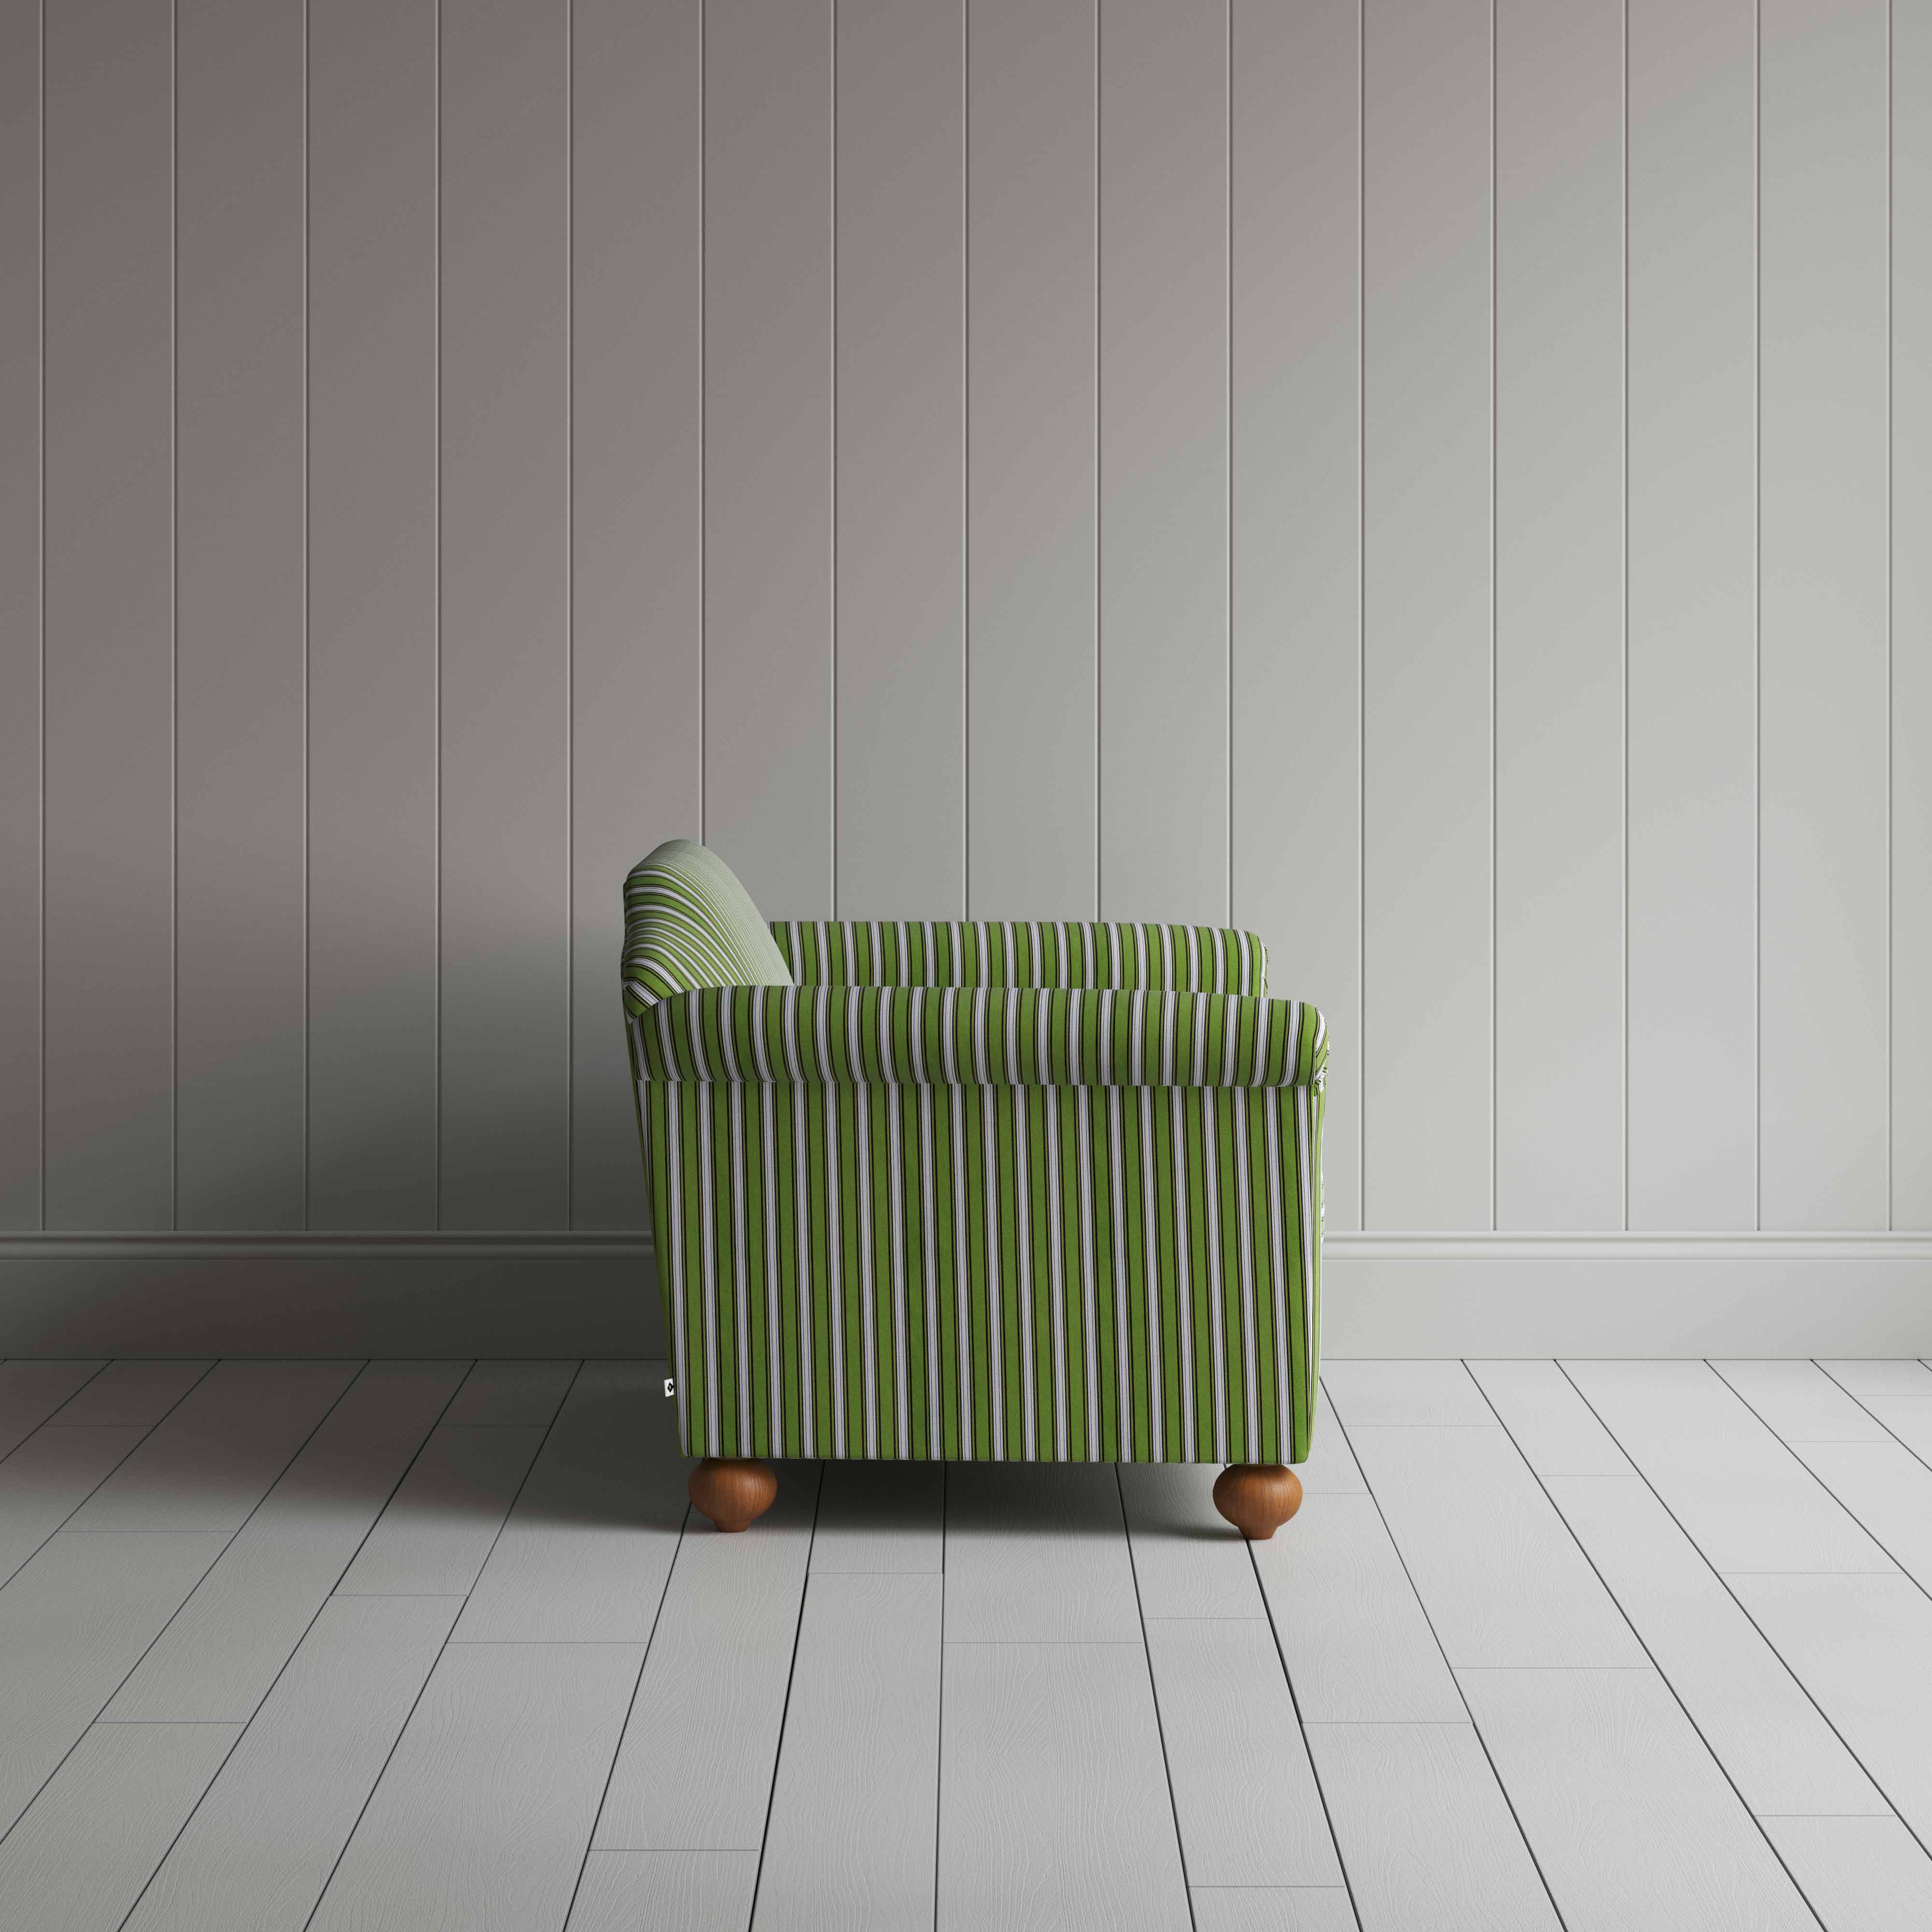  Dolittle 2 Seater Sofa in Colonnade Cotton, Green and Wine 